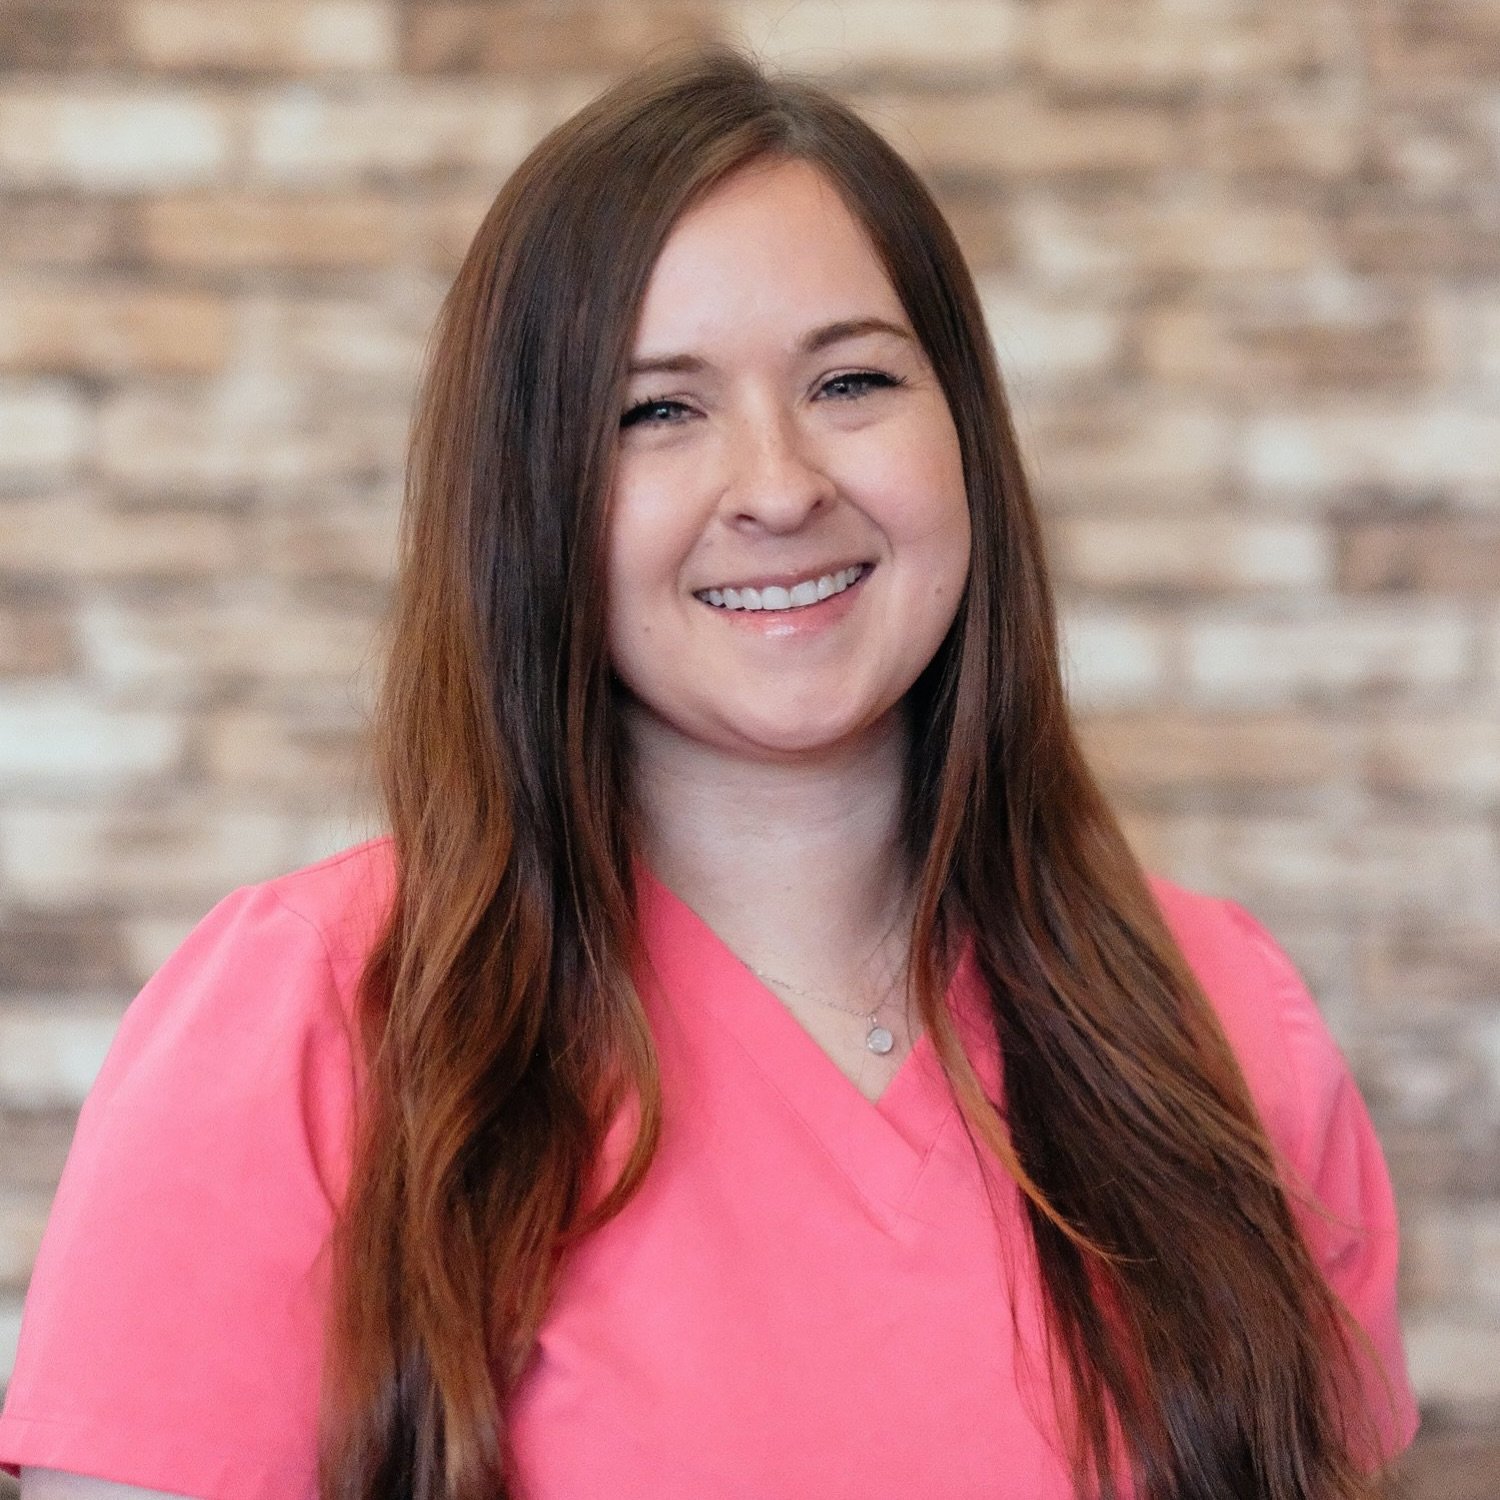 Meet Our Team Member, Emily ✨ Hi, my name is Emily, I&rsquo;ve been in the dog grooming industry since 2012. I&rsquo;ve always been an avid animal lover. I graduated from the American Grooming Academy, and landed my first job shortly after. There, I 